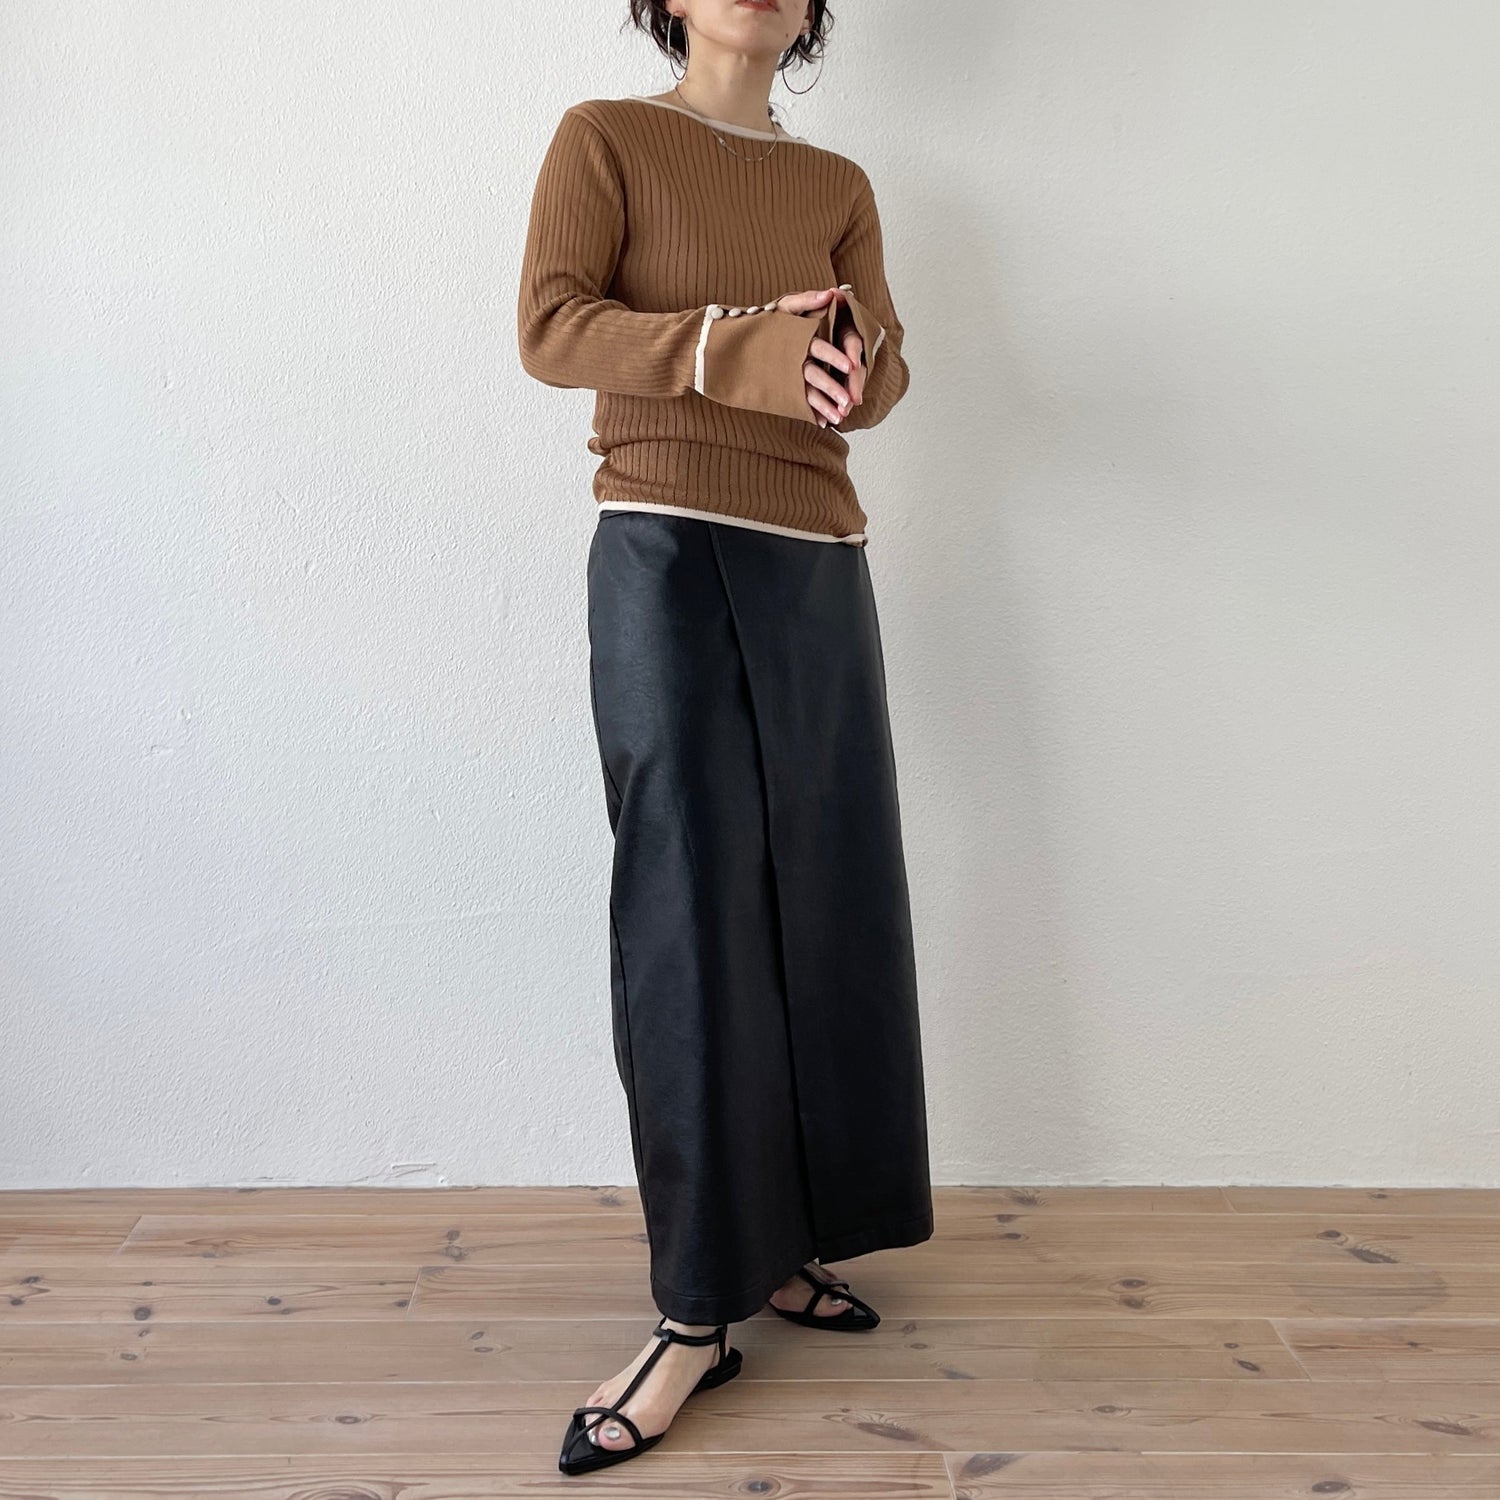 【SAMPLE】flare sleeve knit po / brown